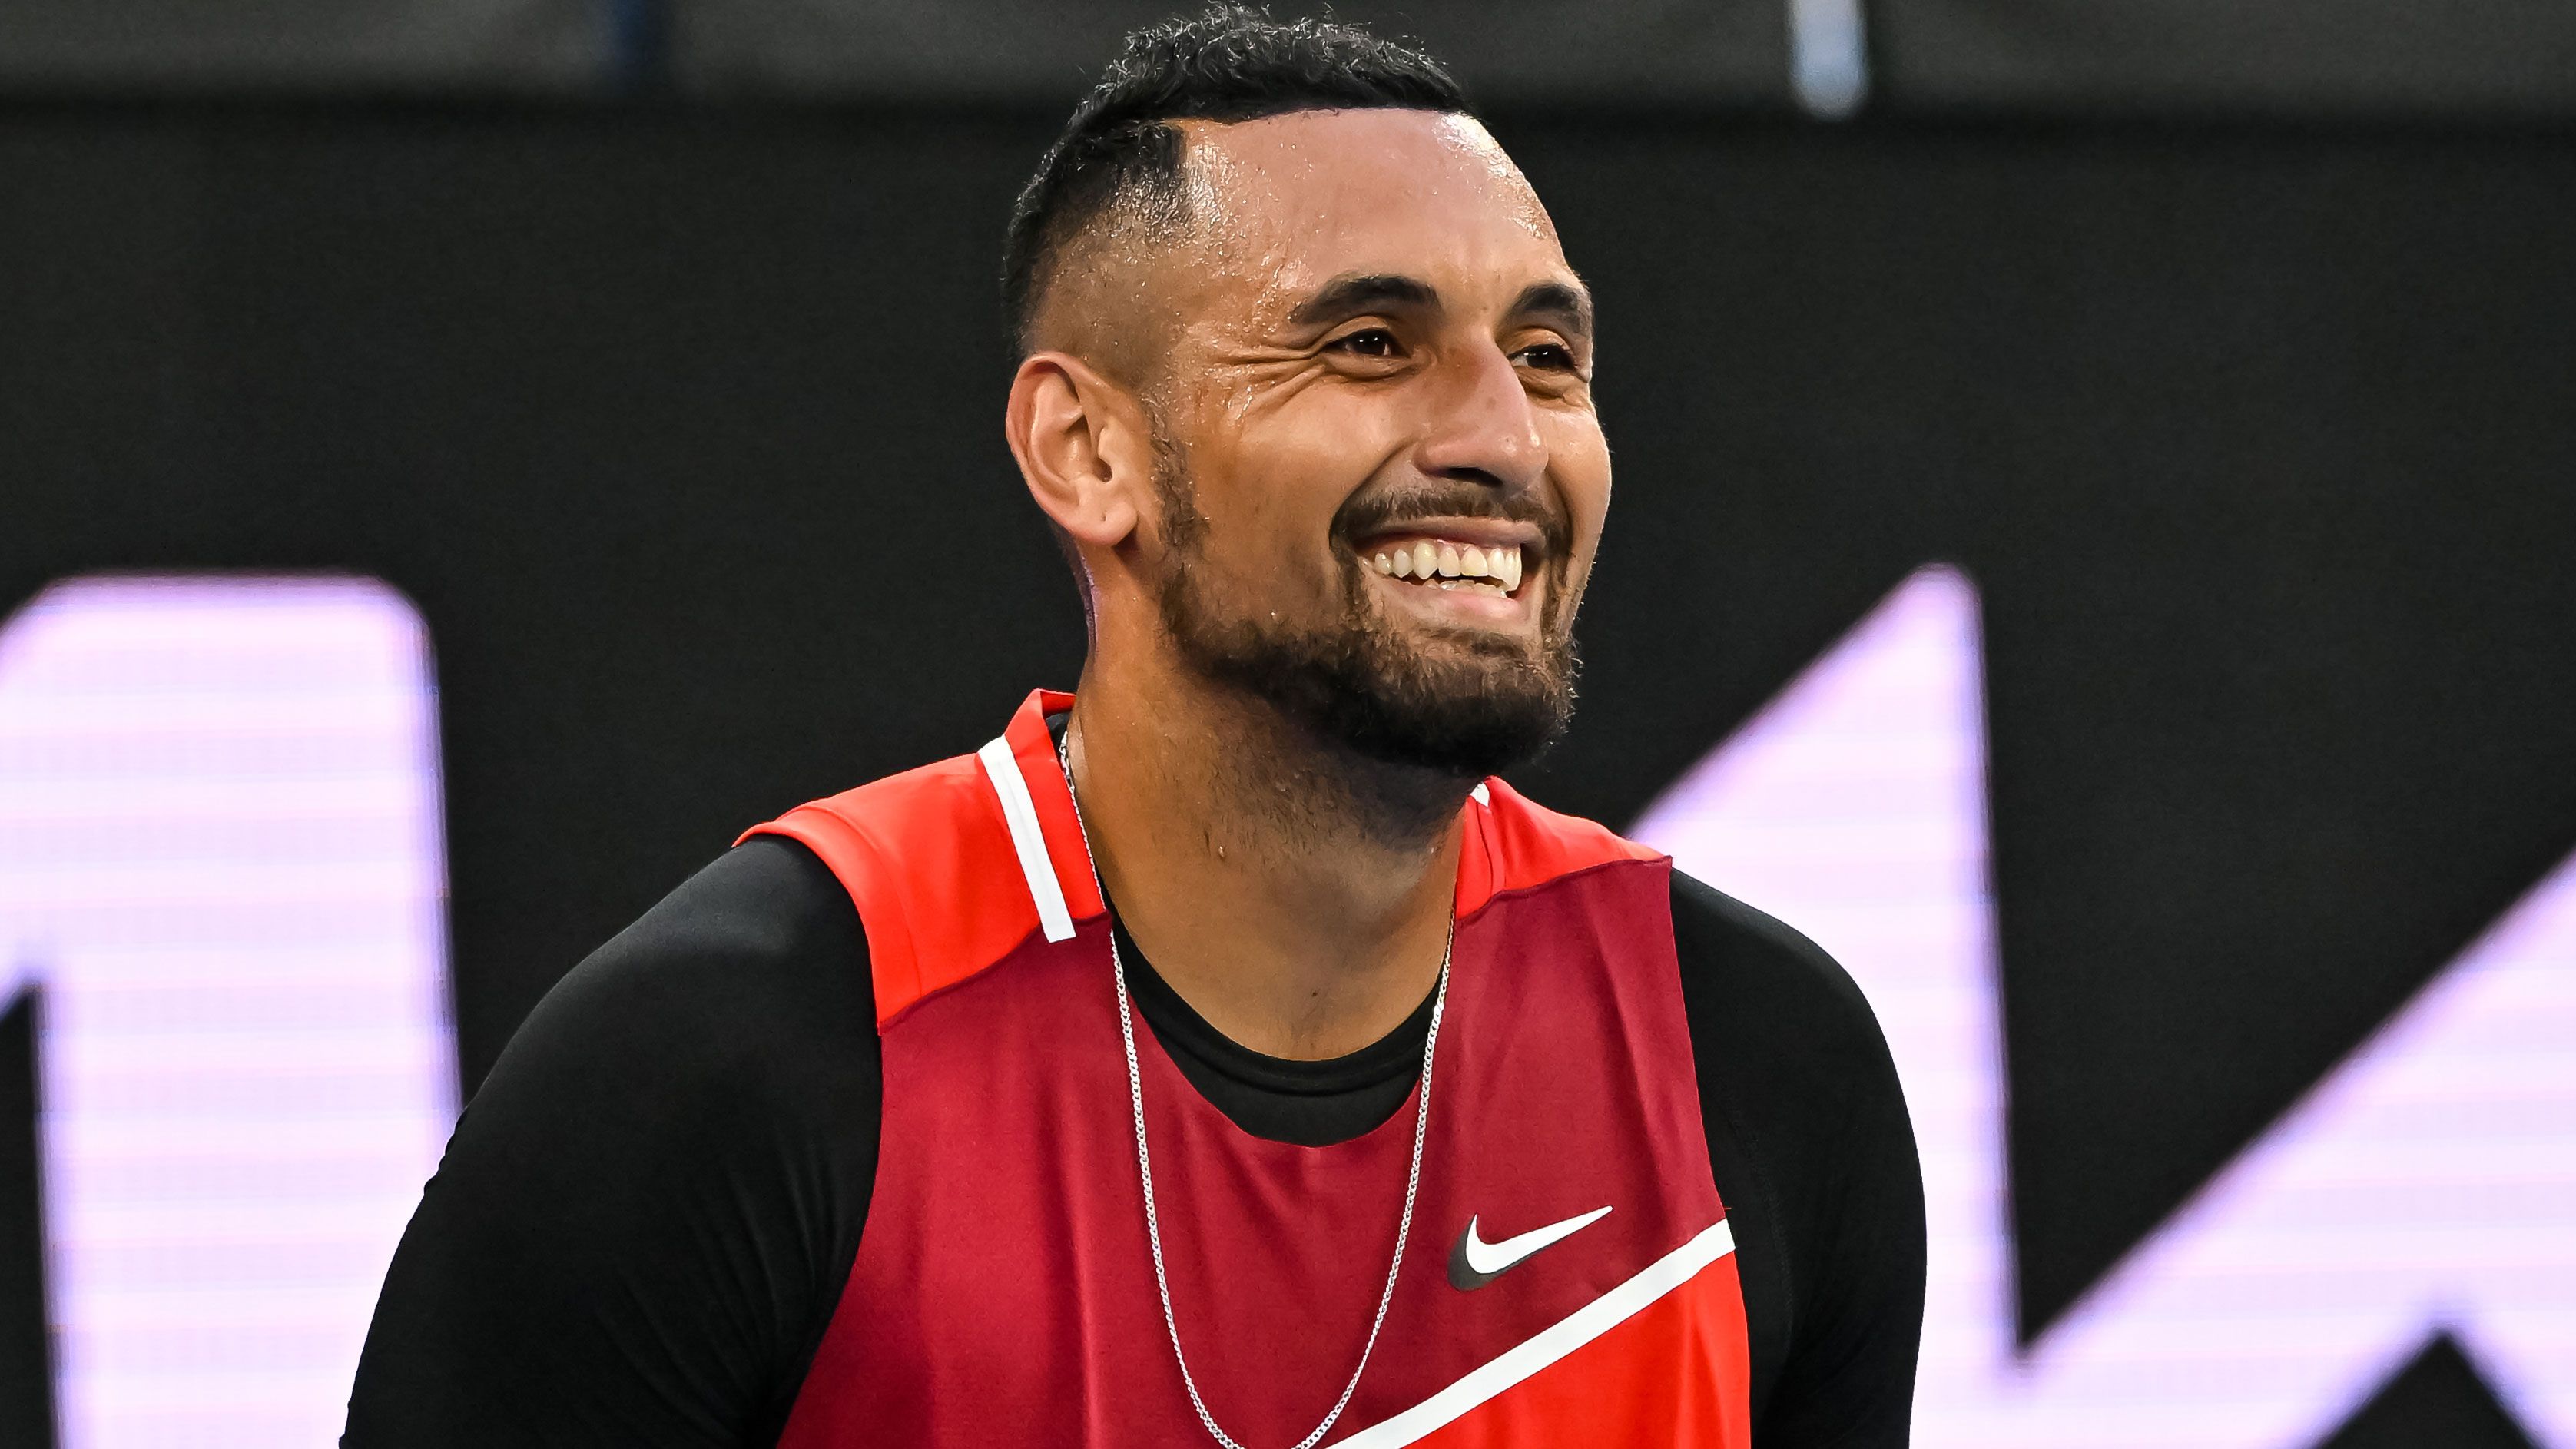 Nick Kyrgios smiles during his round one appearance at the 2022 Australian Open.